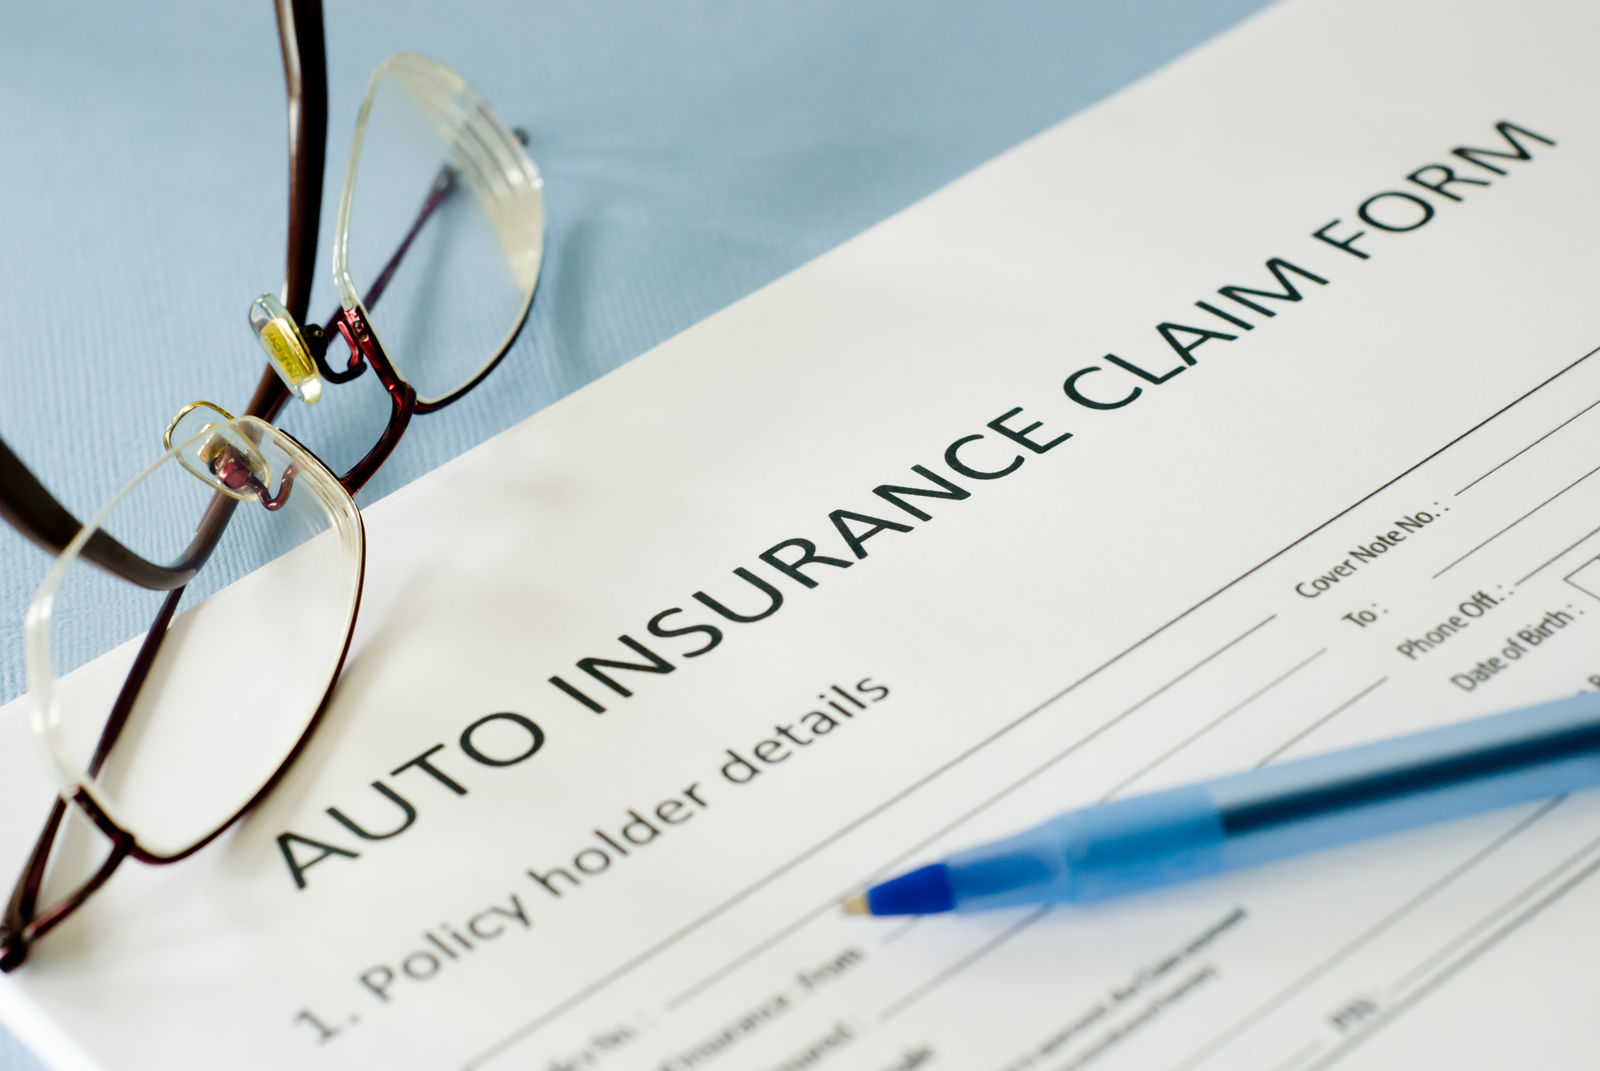 Why is my insurance claim being investigated?